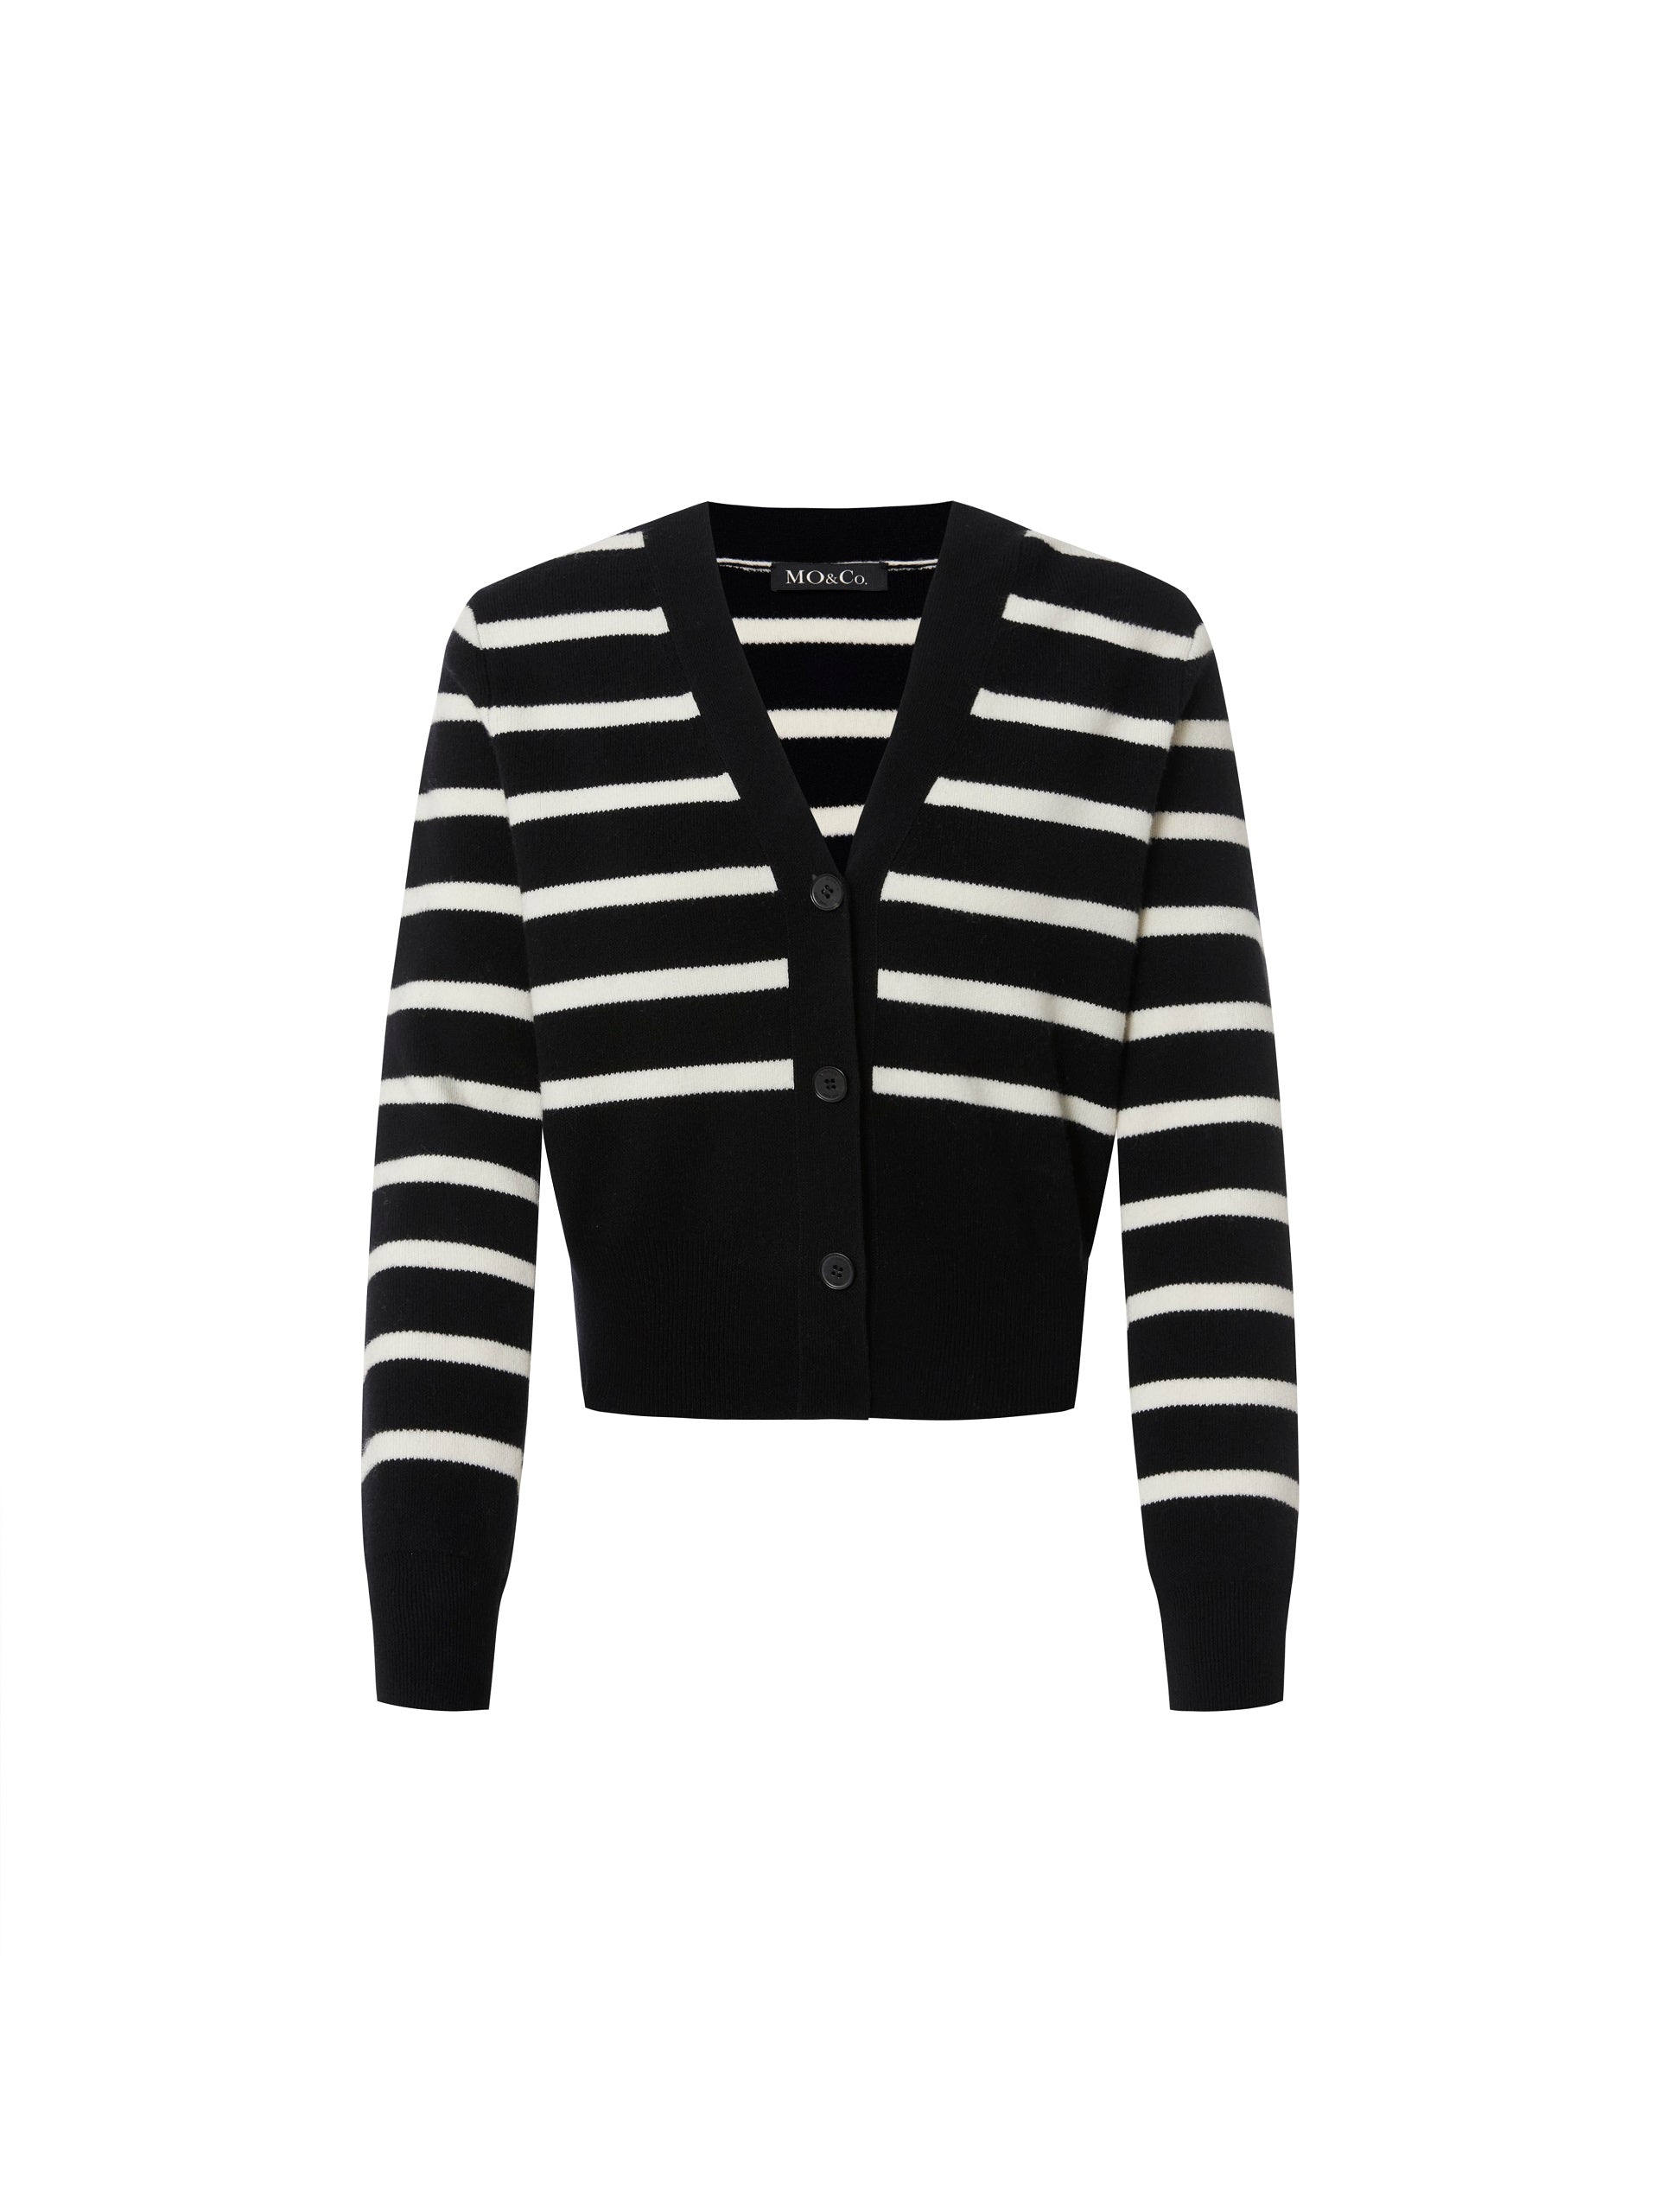 MO&Co. Women's Wool Striped Knit Cardigan Loose Chic V Neck Womens ...